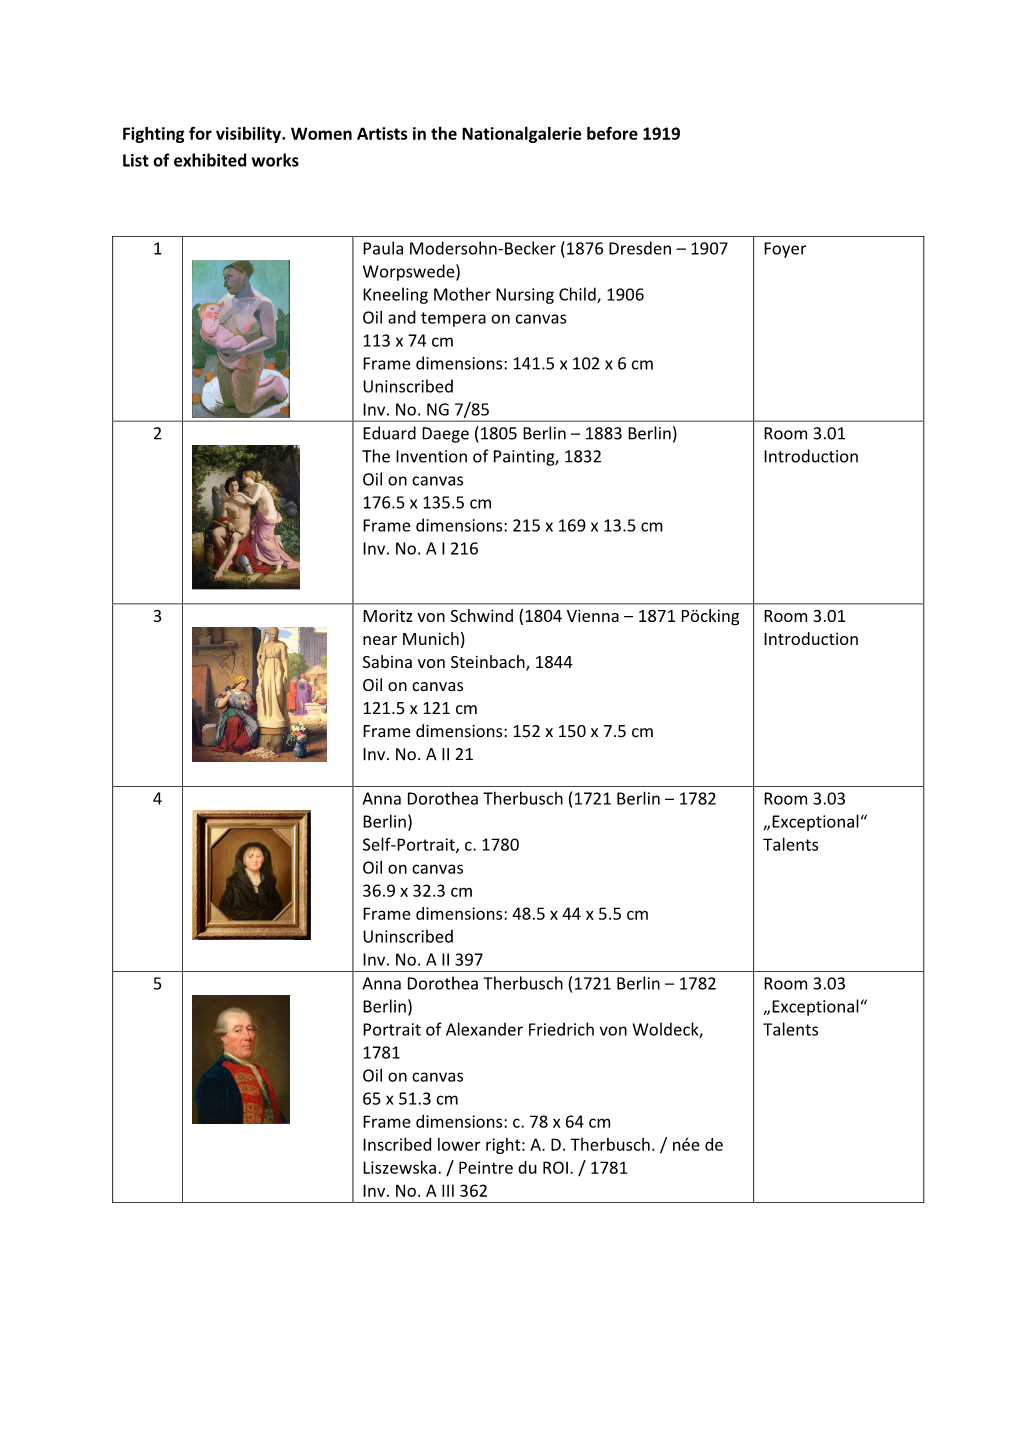 List of Exhibited Works